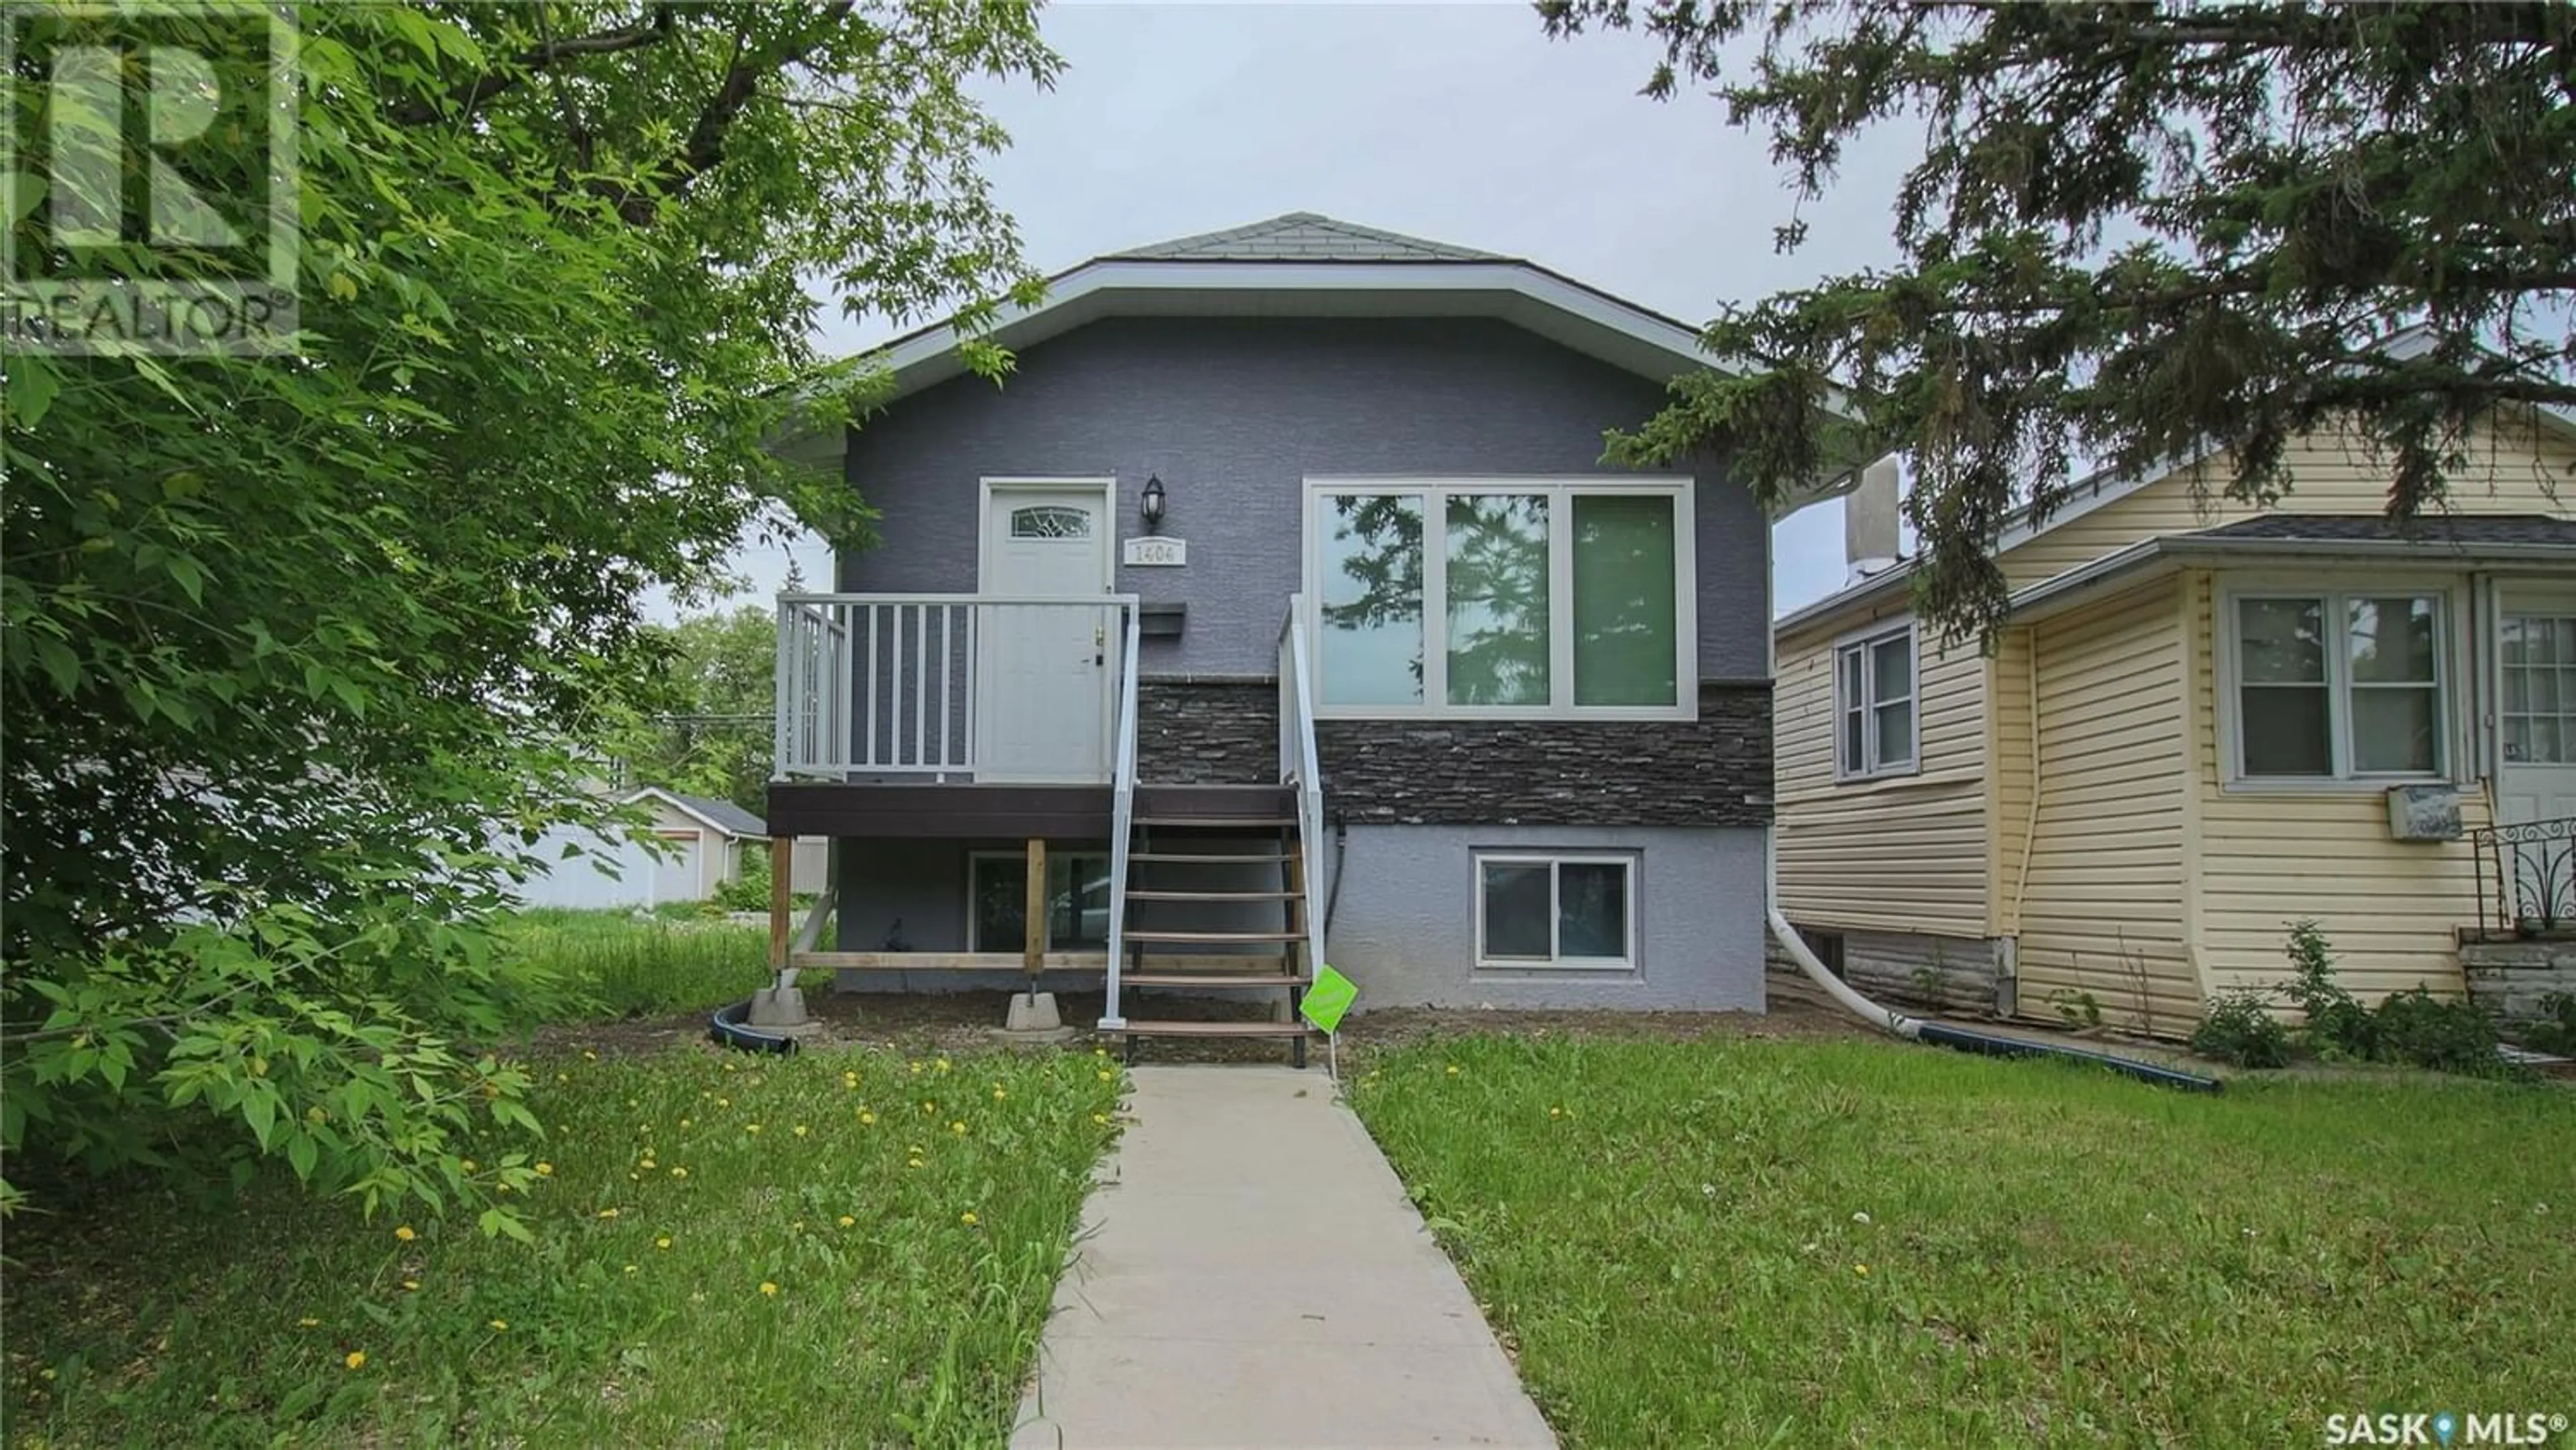 A pic from exterior of the house or condo for 1404 WASCANA STREET, Regina Saskatchewan S4T4J5